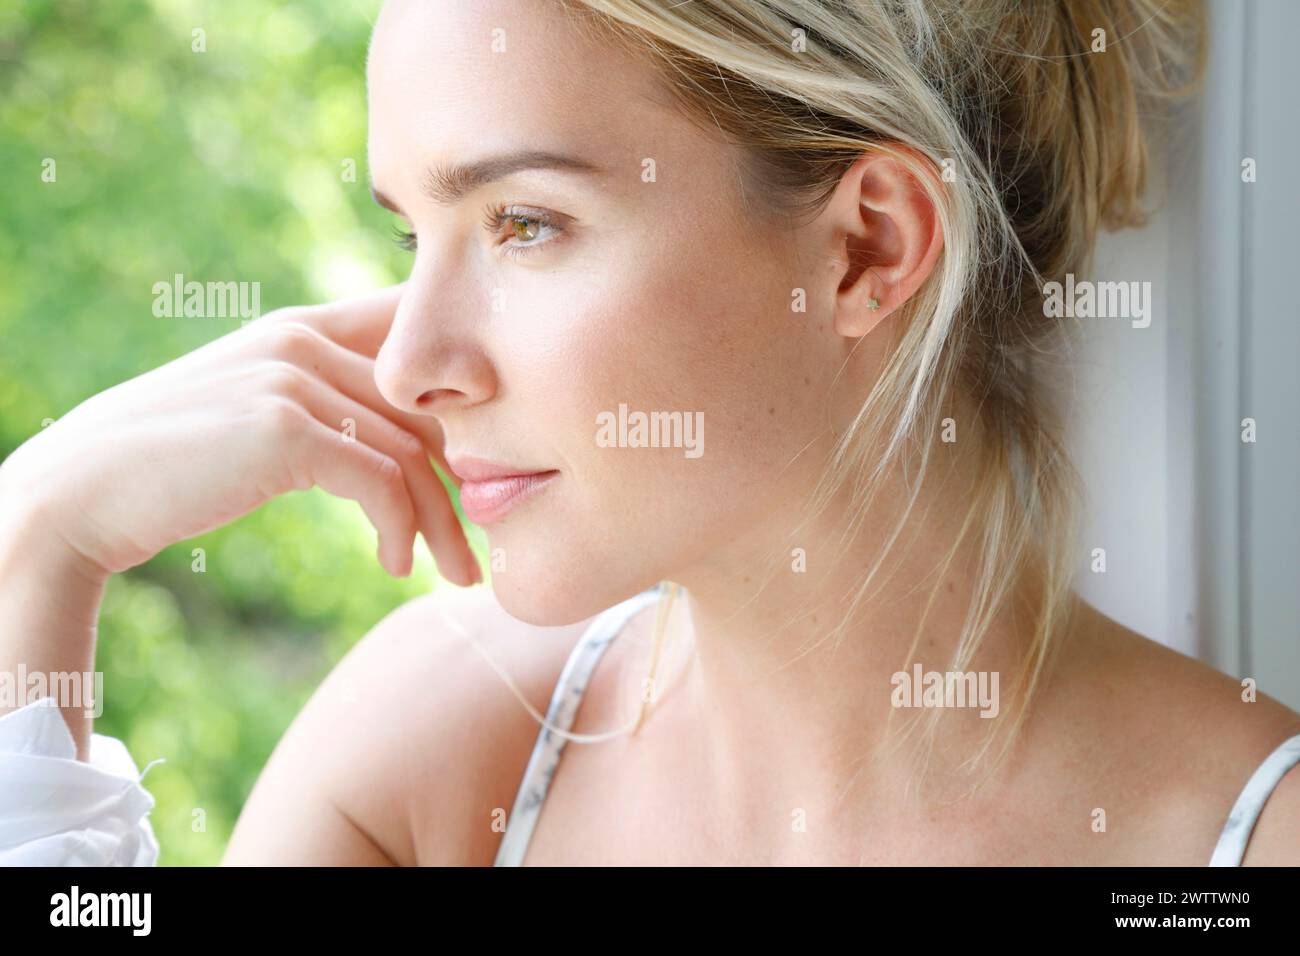 Woman gazing out a window in daylight Stock Photo